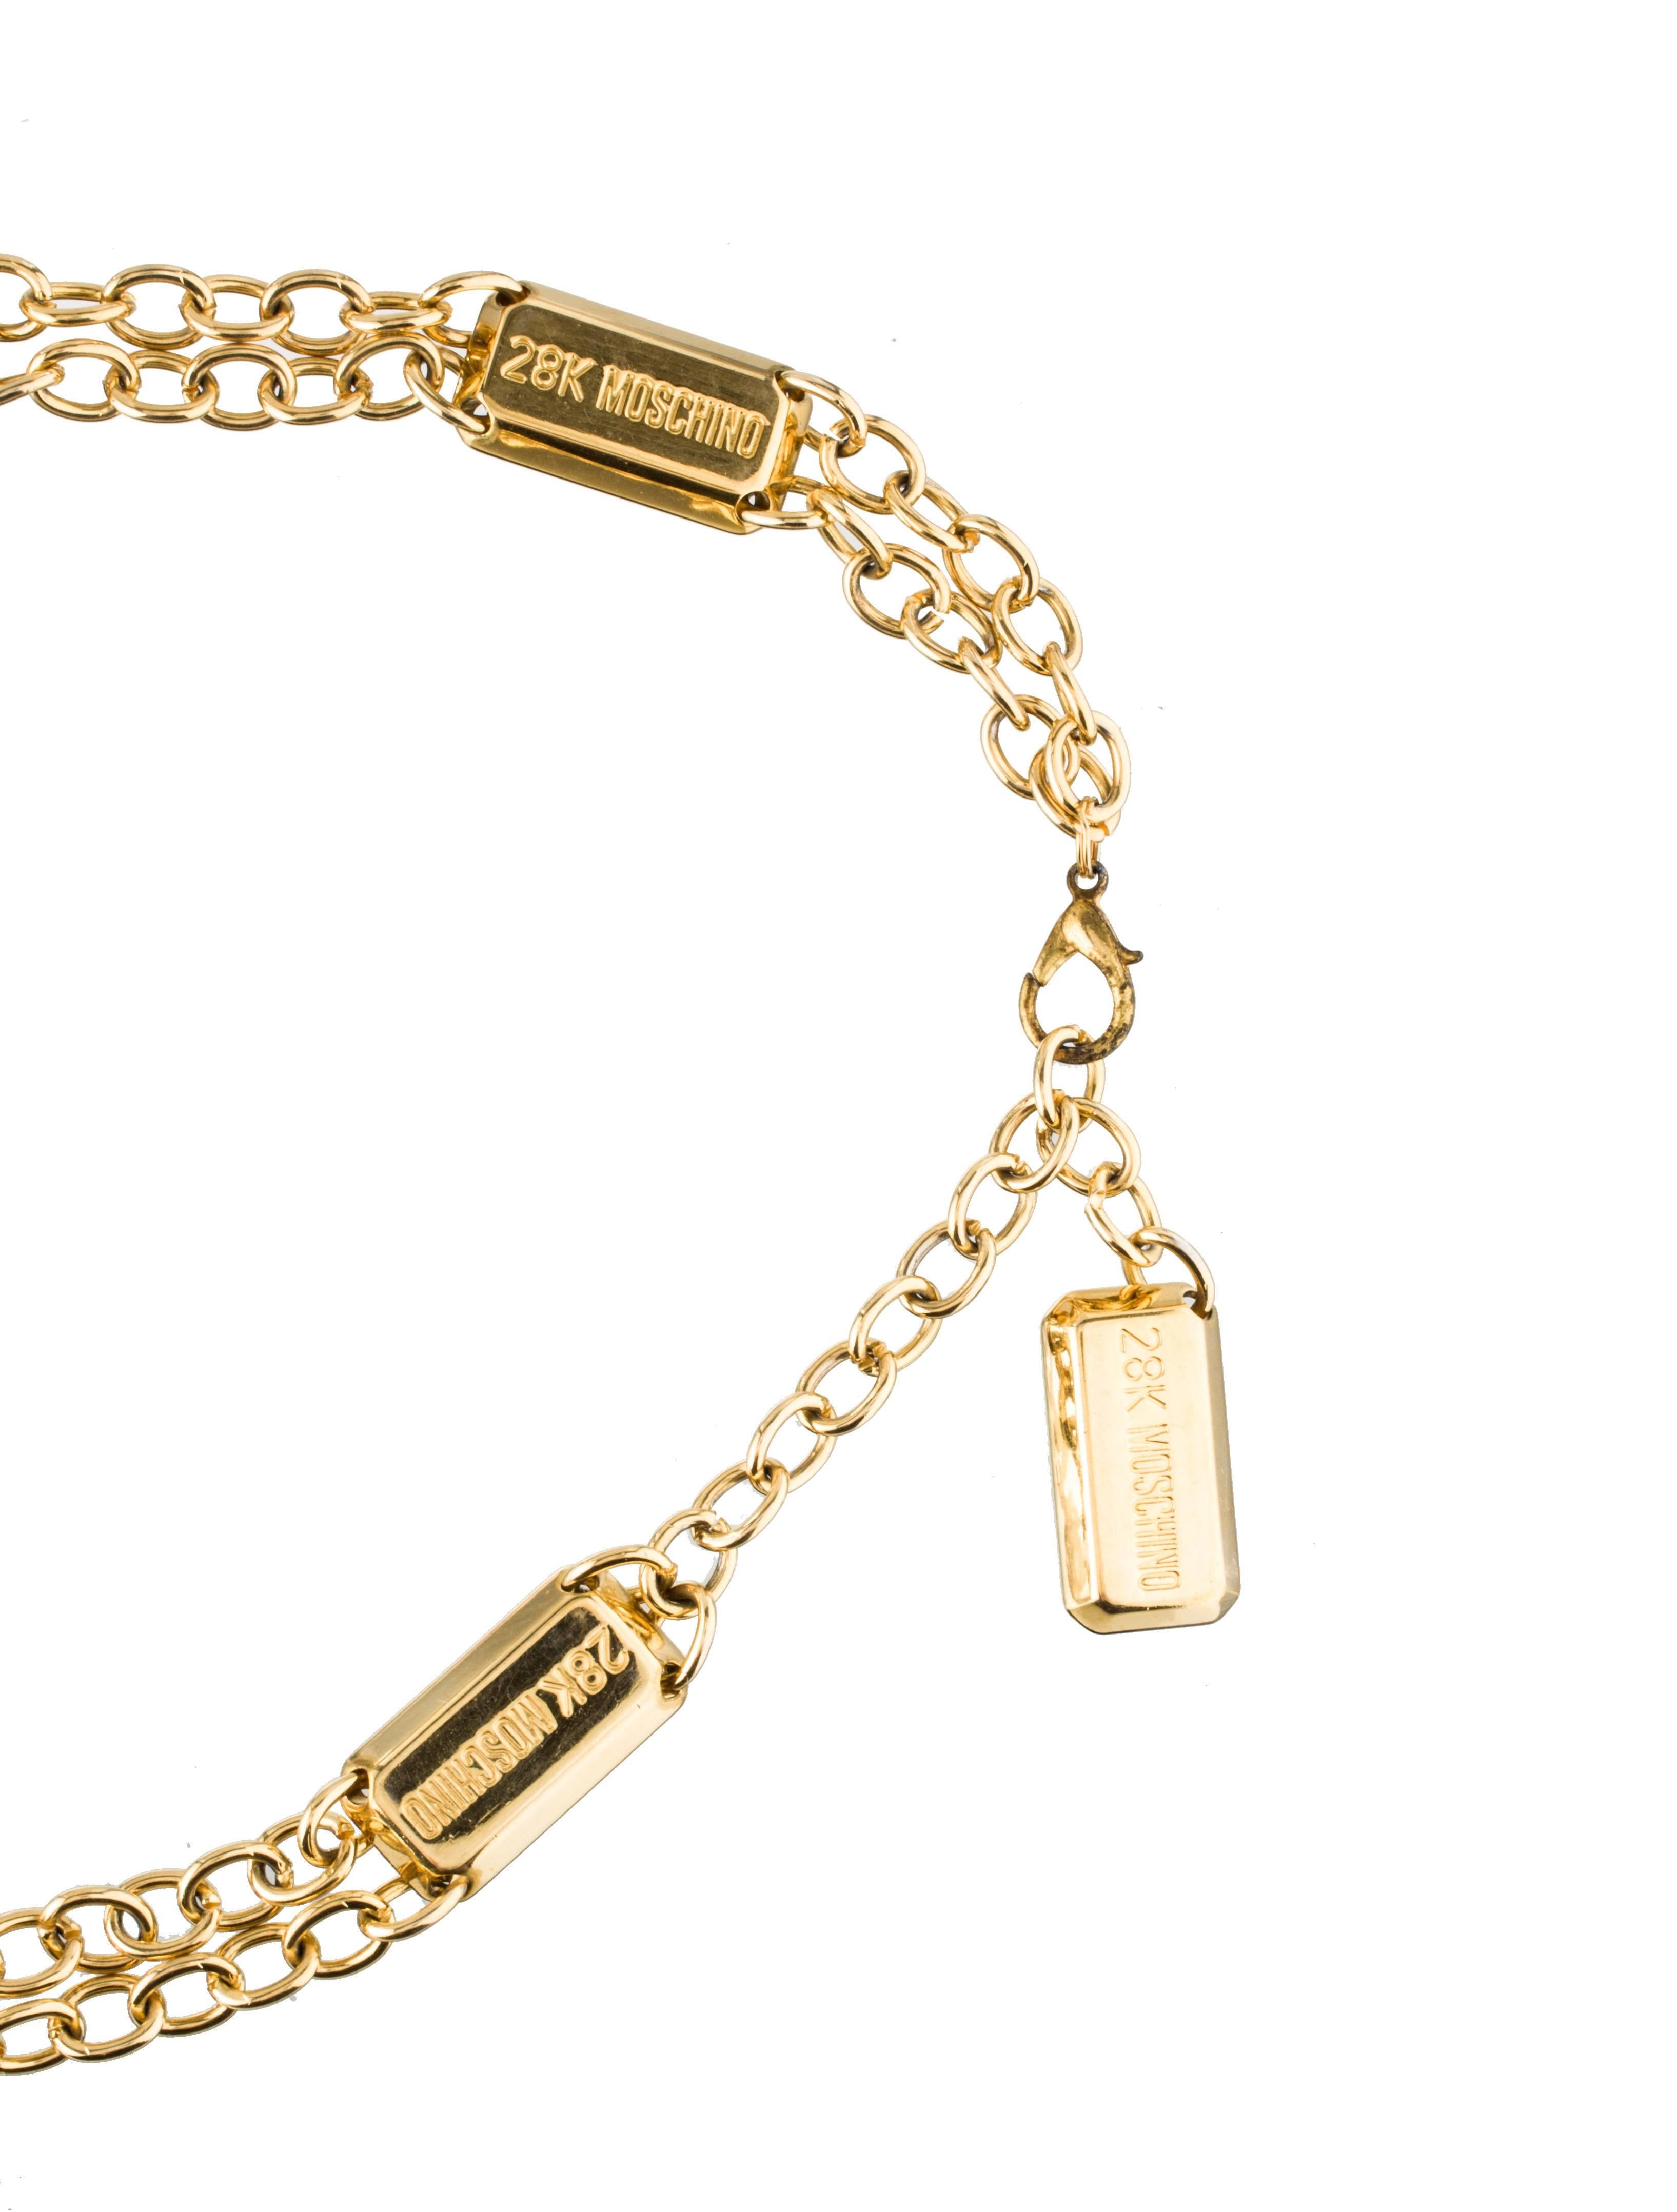 Moschino vintage 1990's Redwall chain charm belt featuring mini gold tone bars that read '28k Moschino.' Each bar is stamped 'Redwall, made in Italy' at back. 

Measures approximately 35